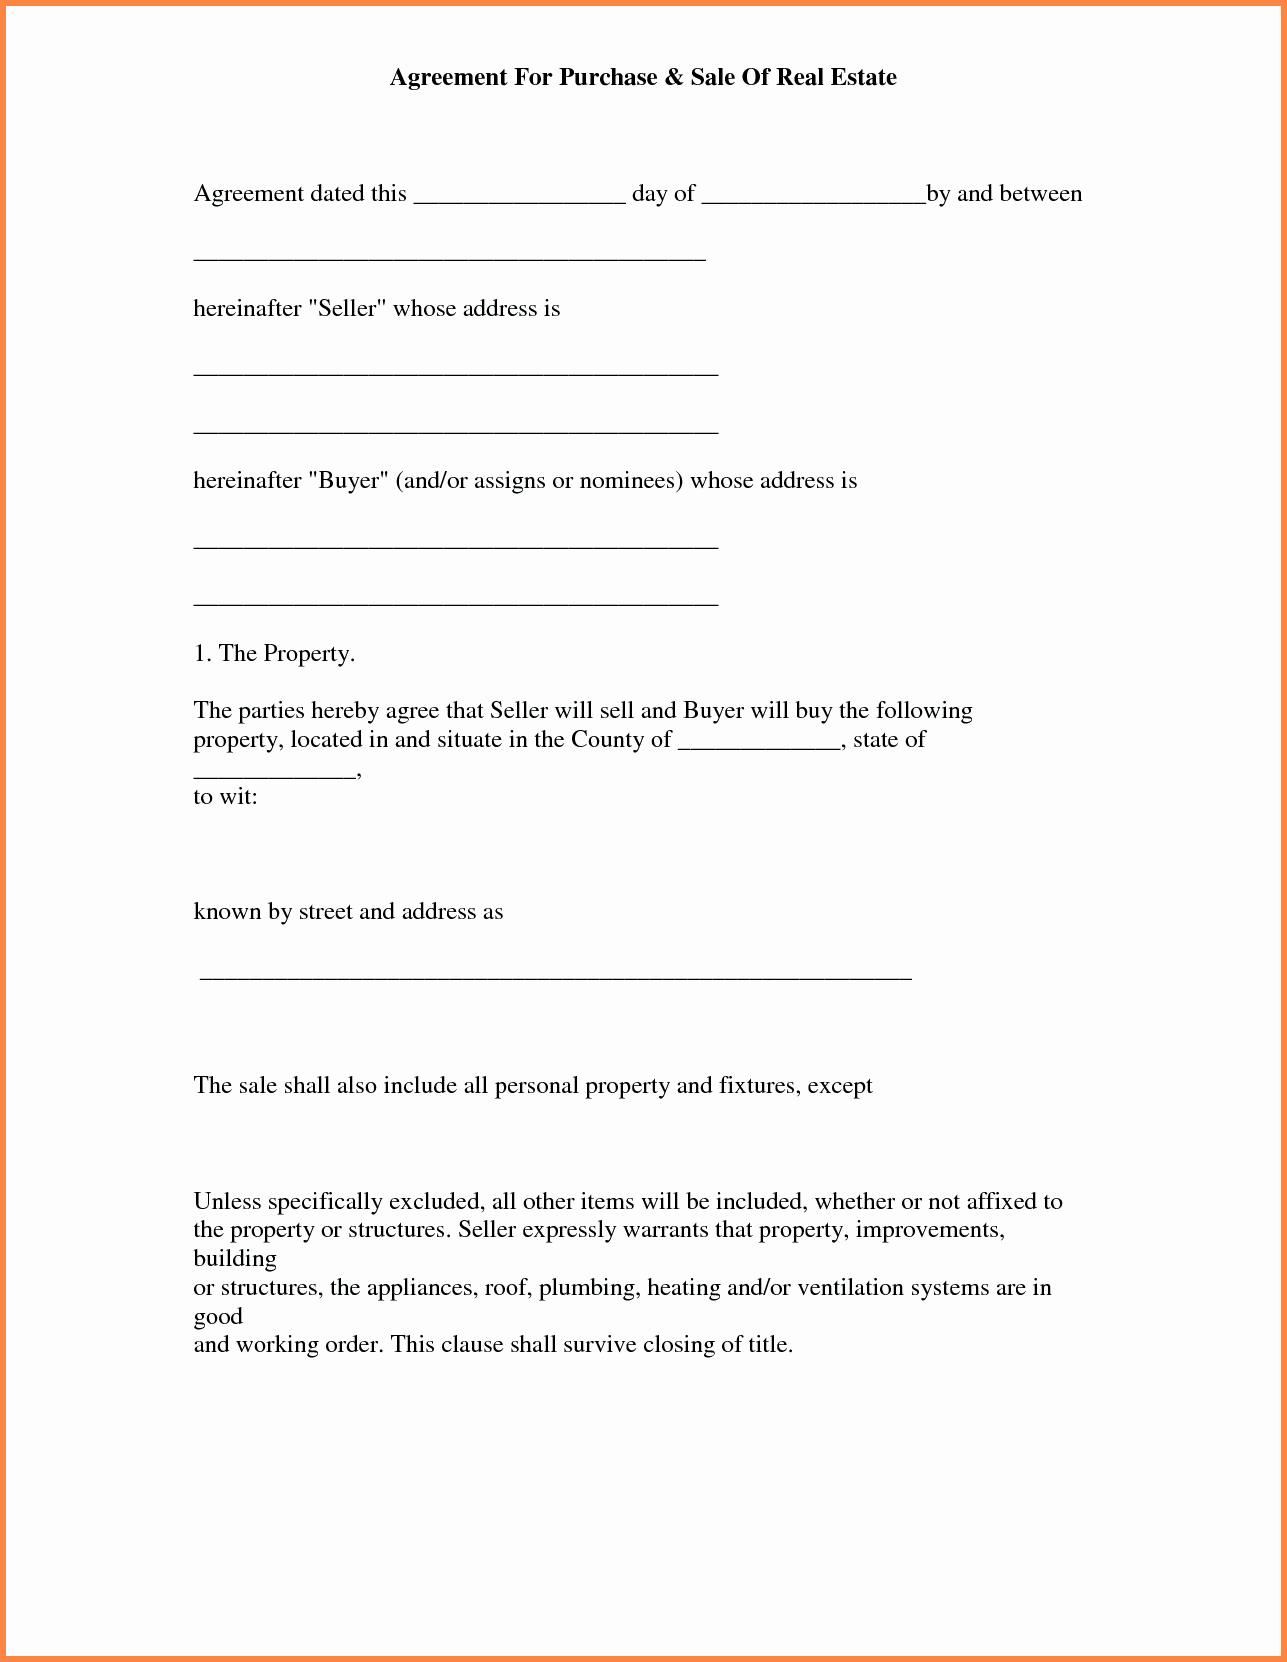 Mercial Real Estate Letter Of Intent Template Sample format